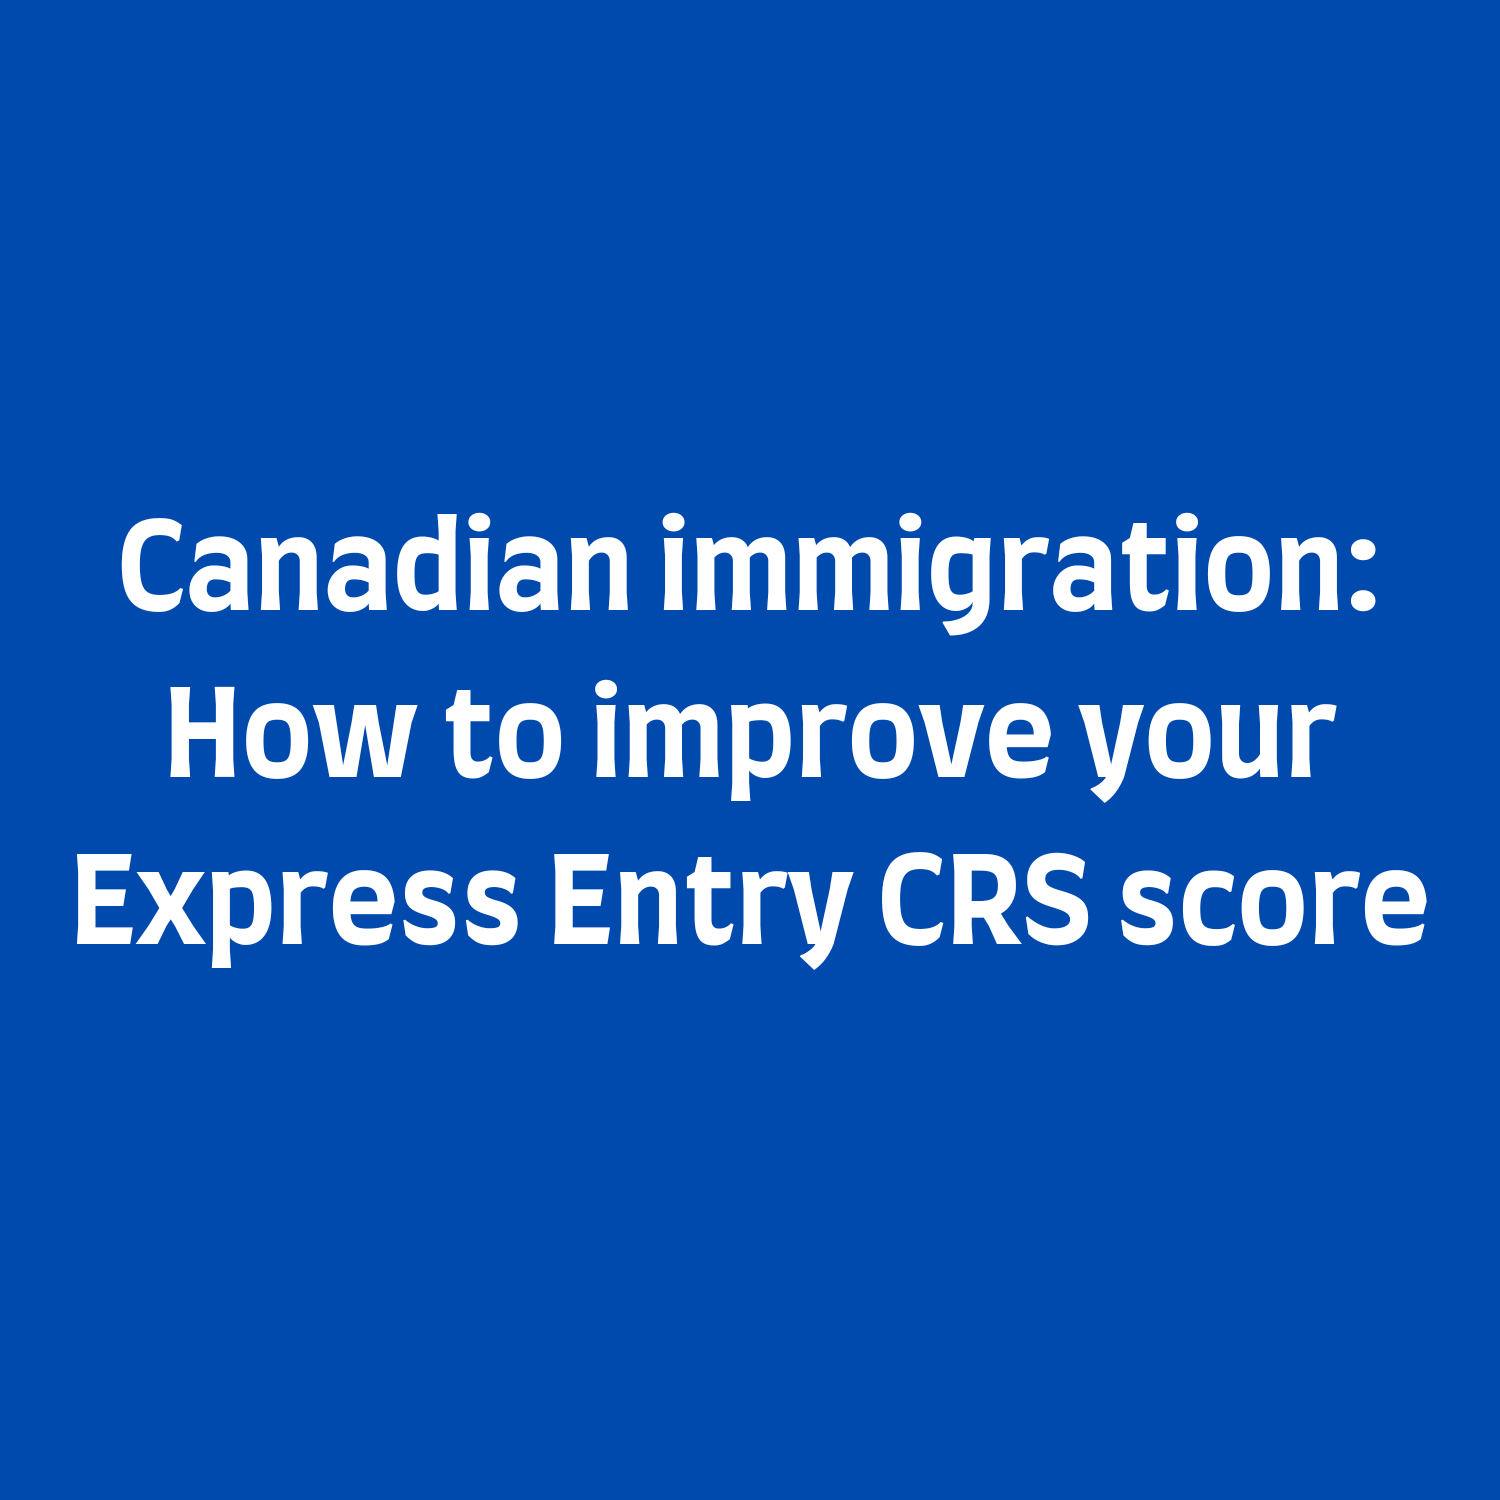 Canadian immigration: How to improve your Express Entry CRS score